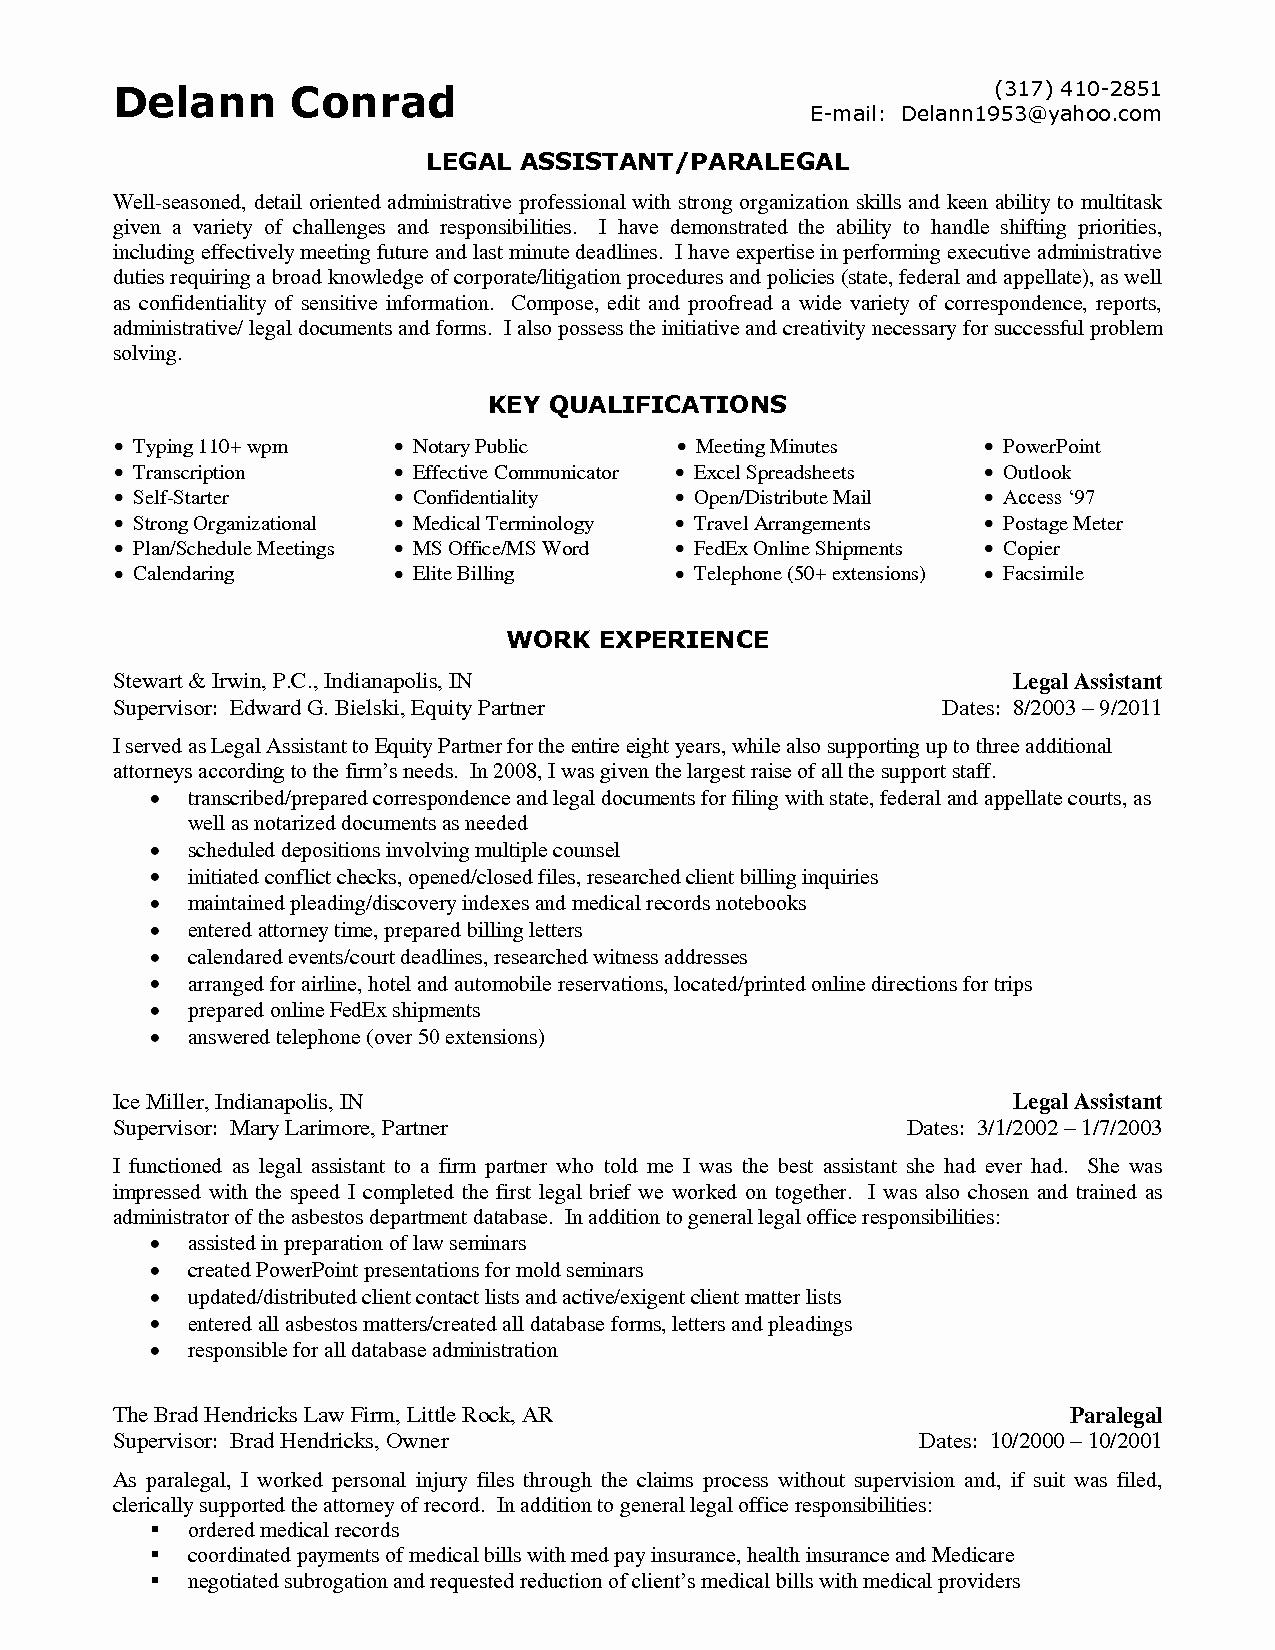 Personal Injury Legal assistant Resume Sample